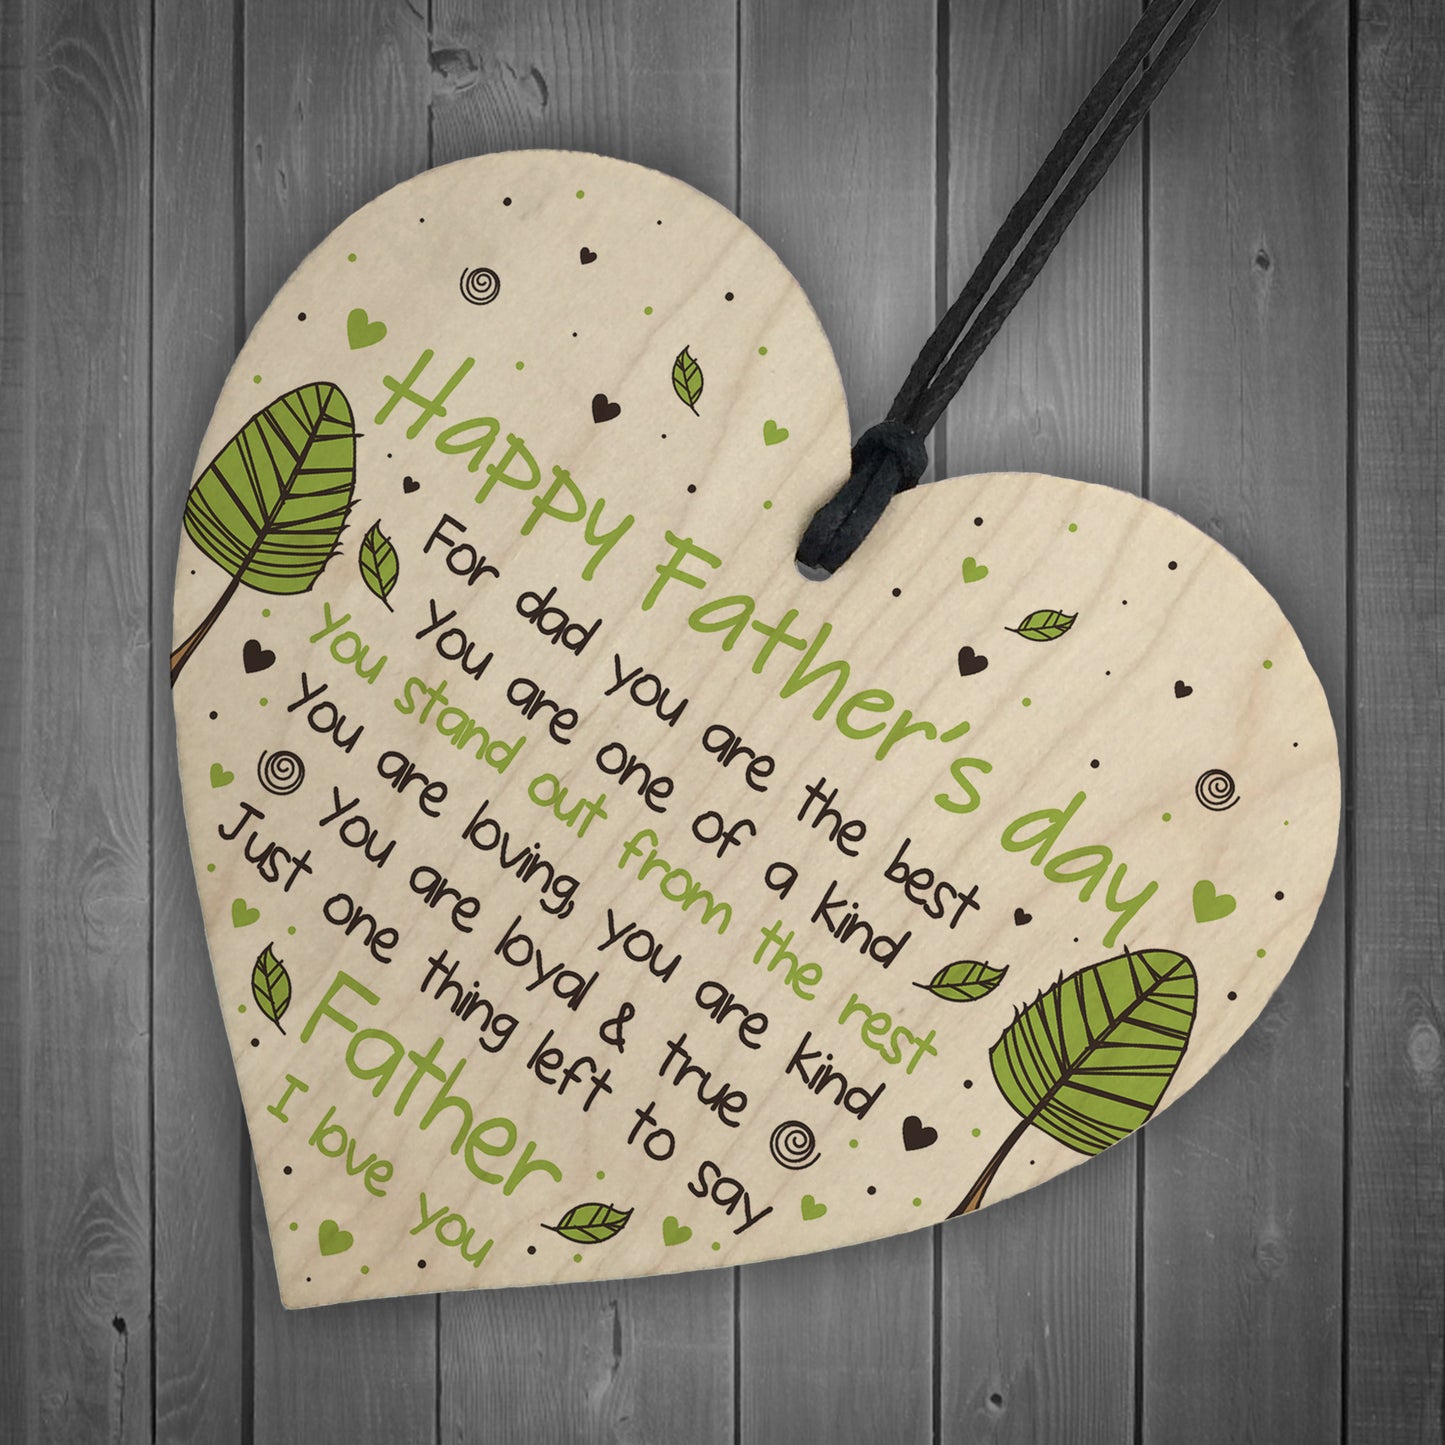 Fathers Day Gift Wooden Heart Fathers Day Card Gift For Dad